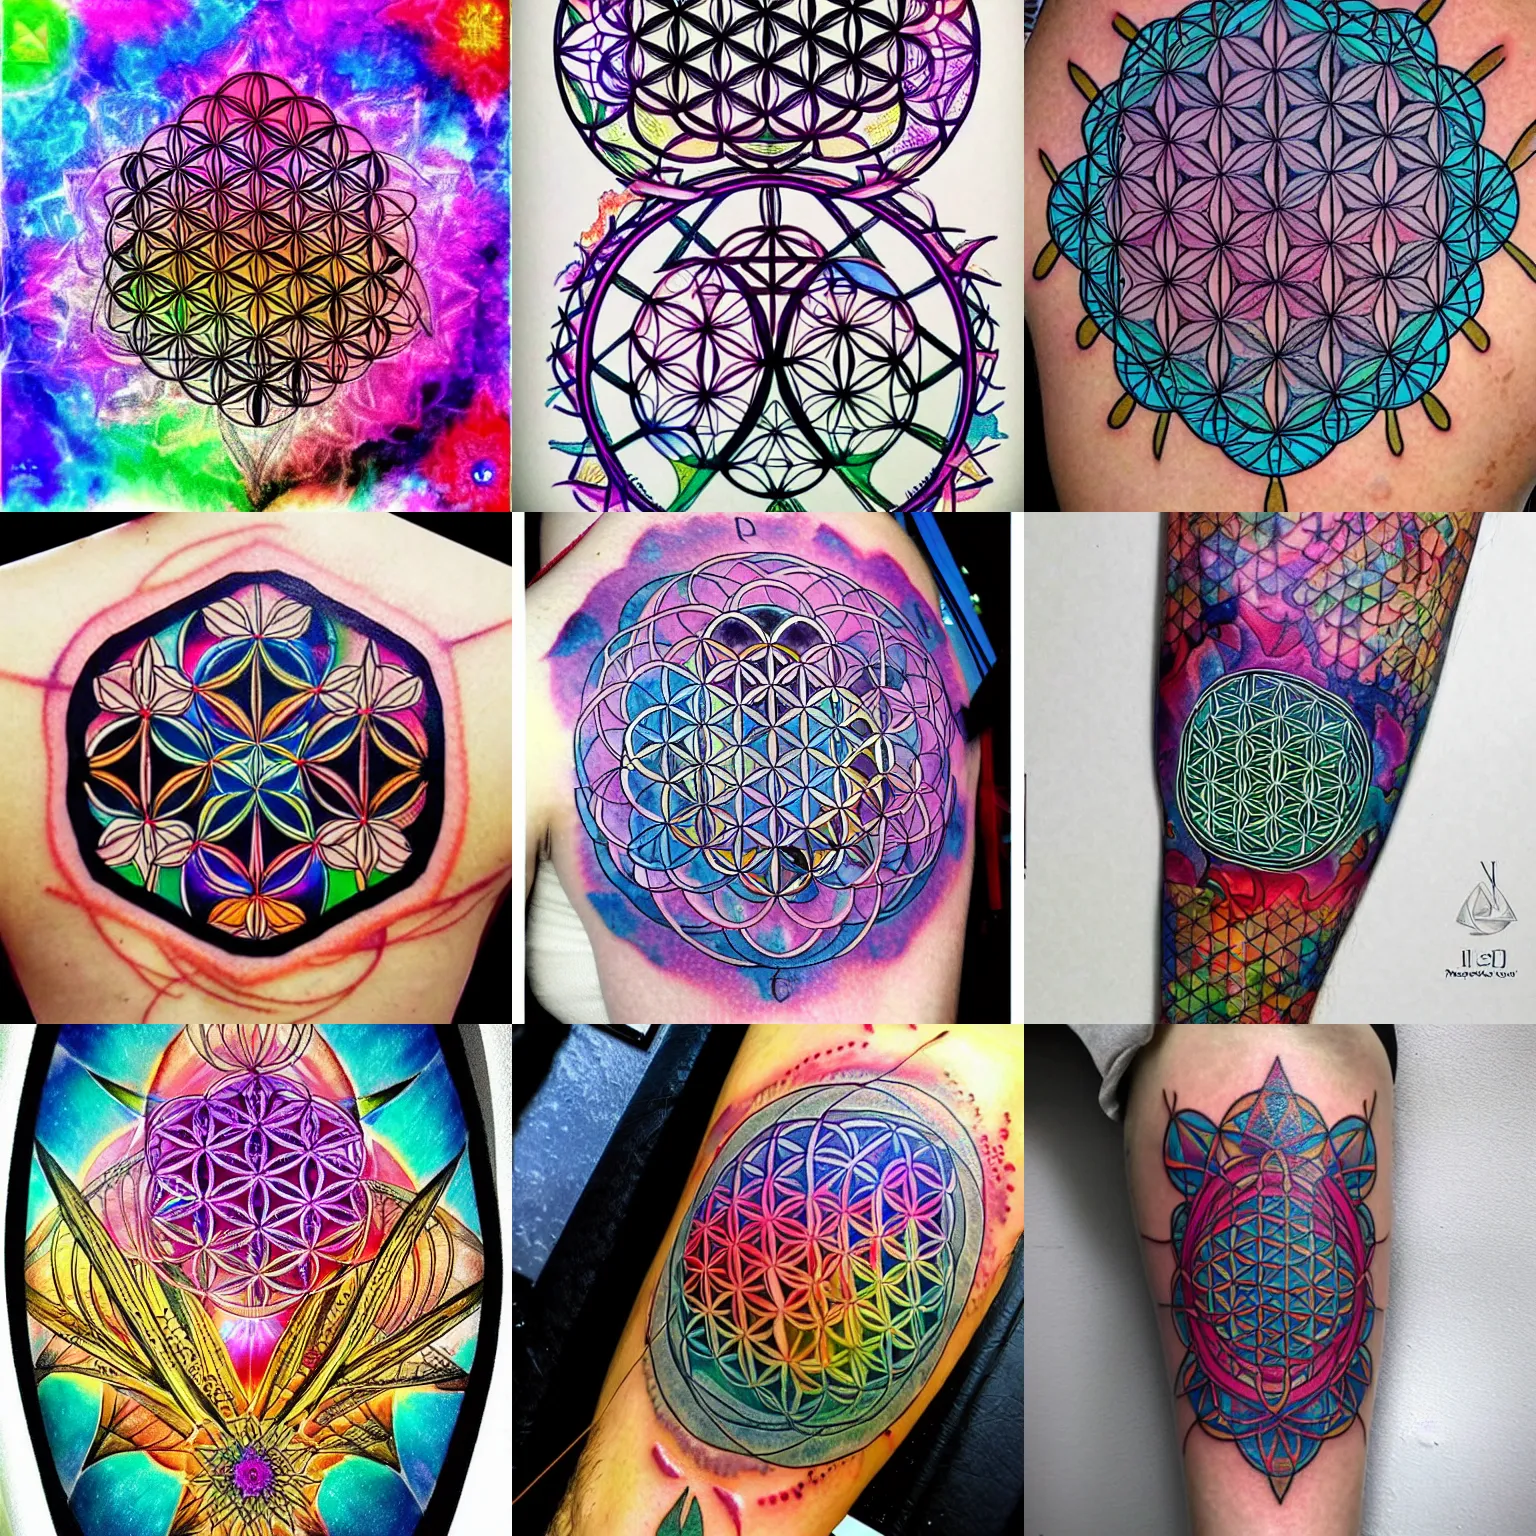 Psyrus tattoo  The Mandala and flower of life butterfly  Facebook